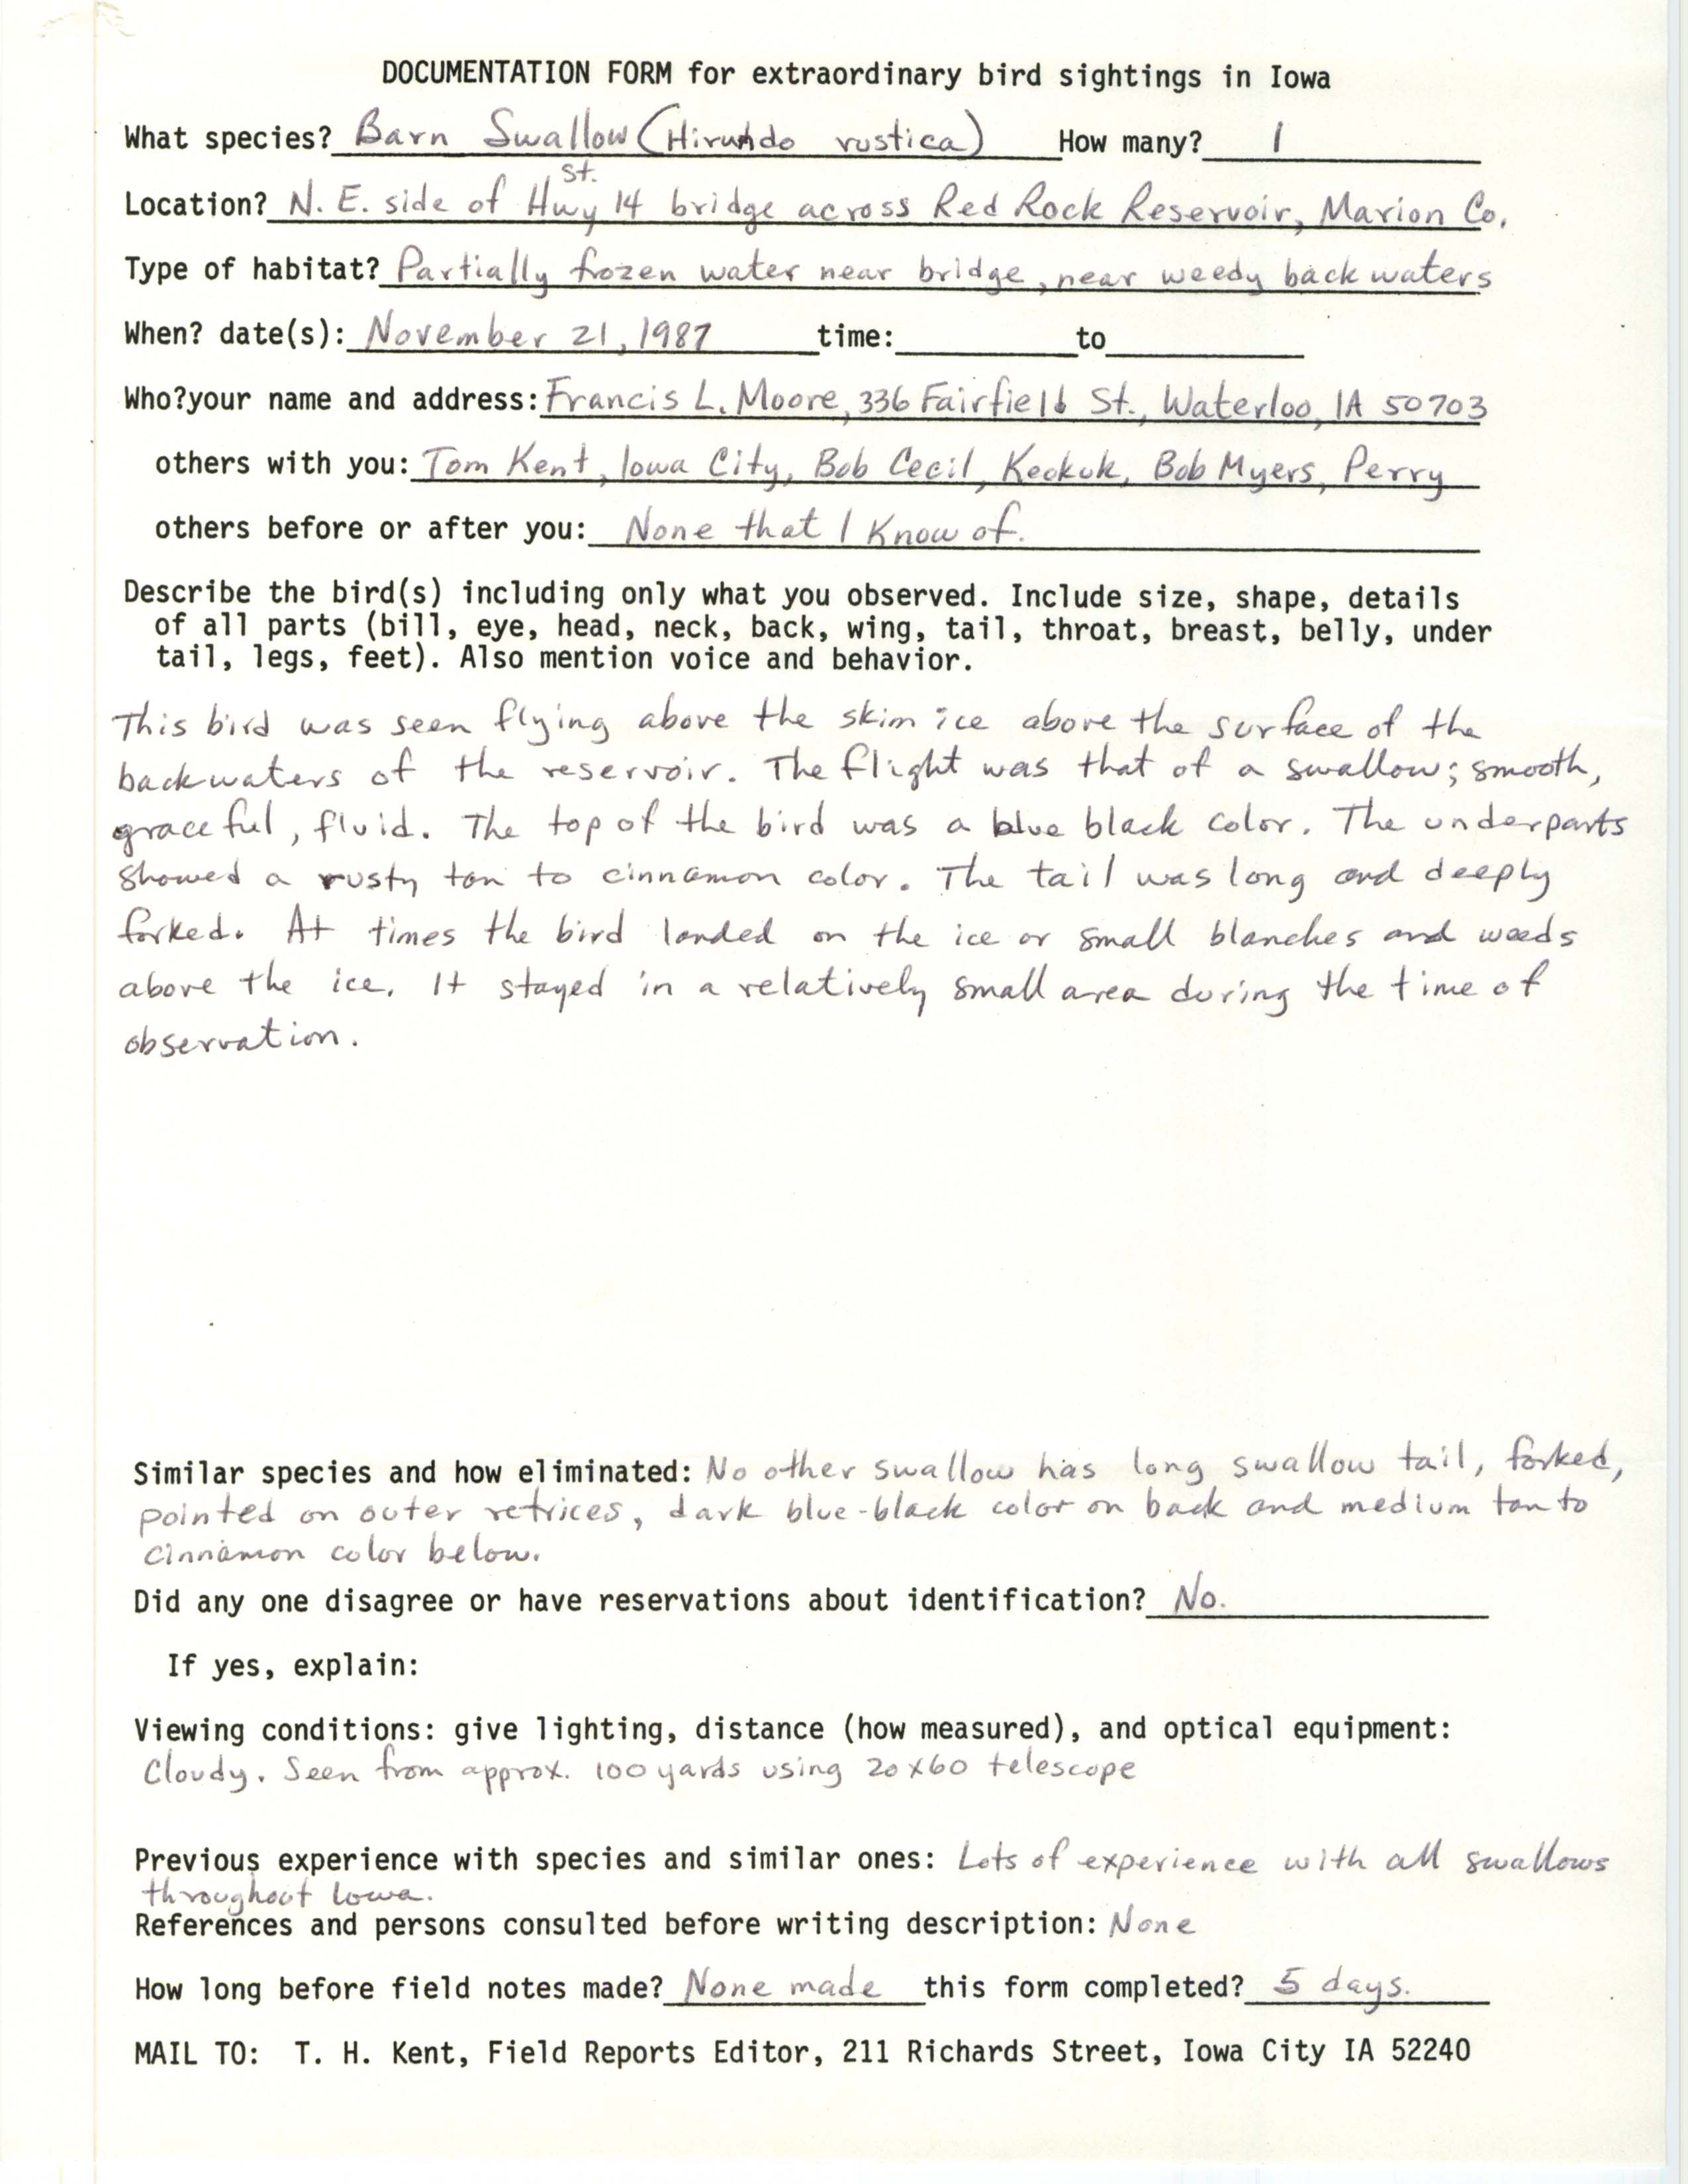 Rare bird documentation form for Barn Swallow at Red Rock Reservoir, 1987